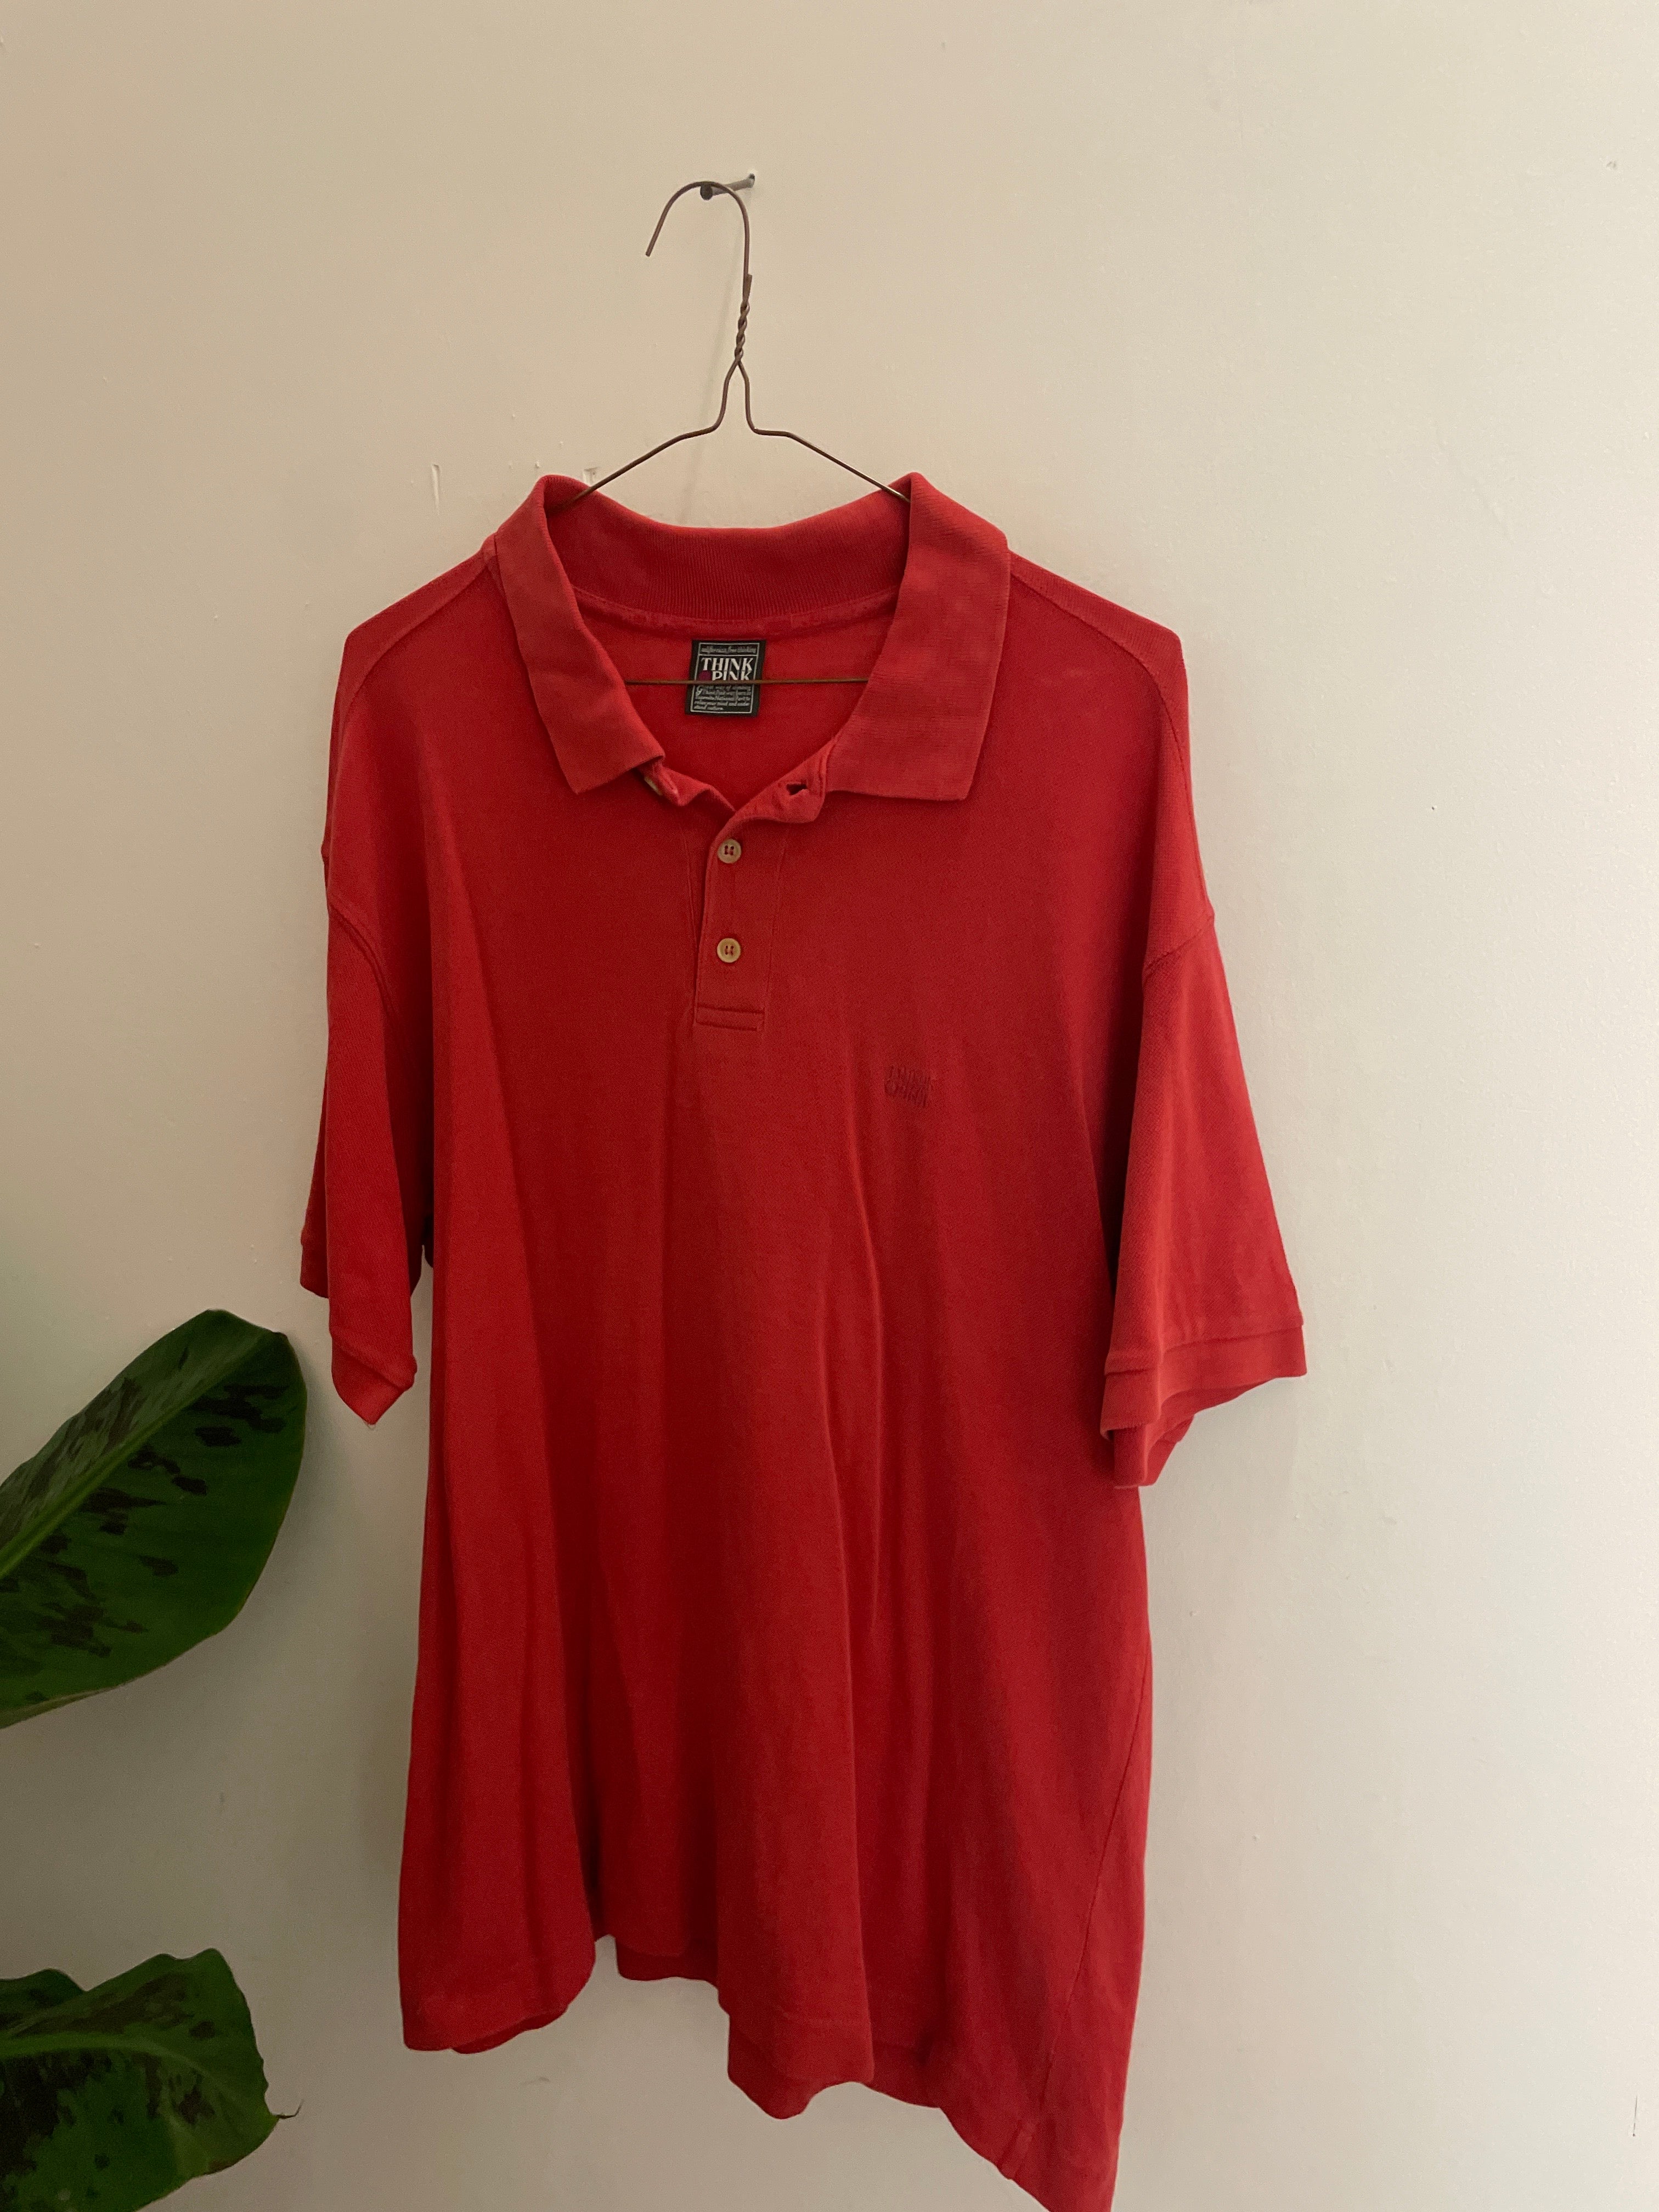 Vintage minkpink red mens polo shirt size Xl